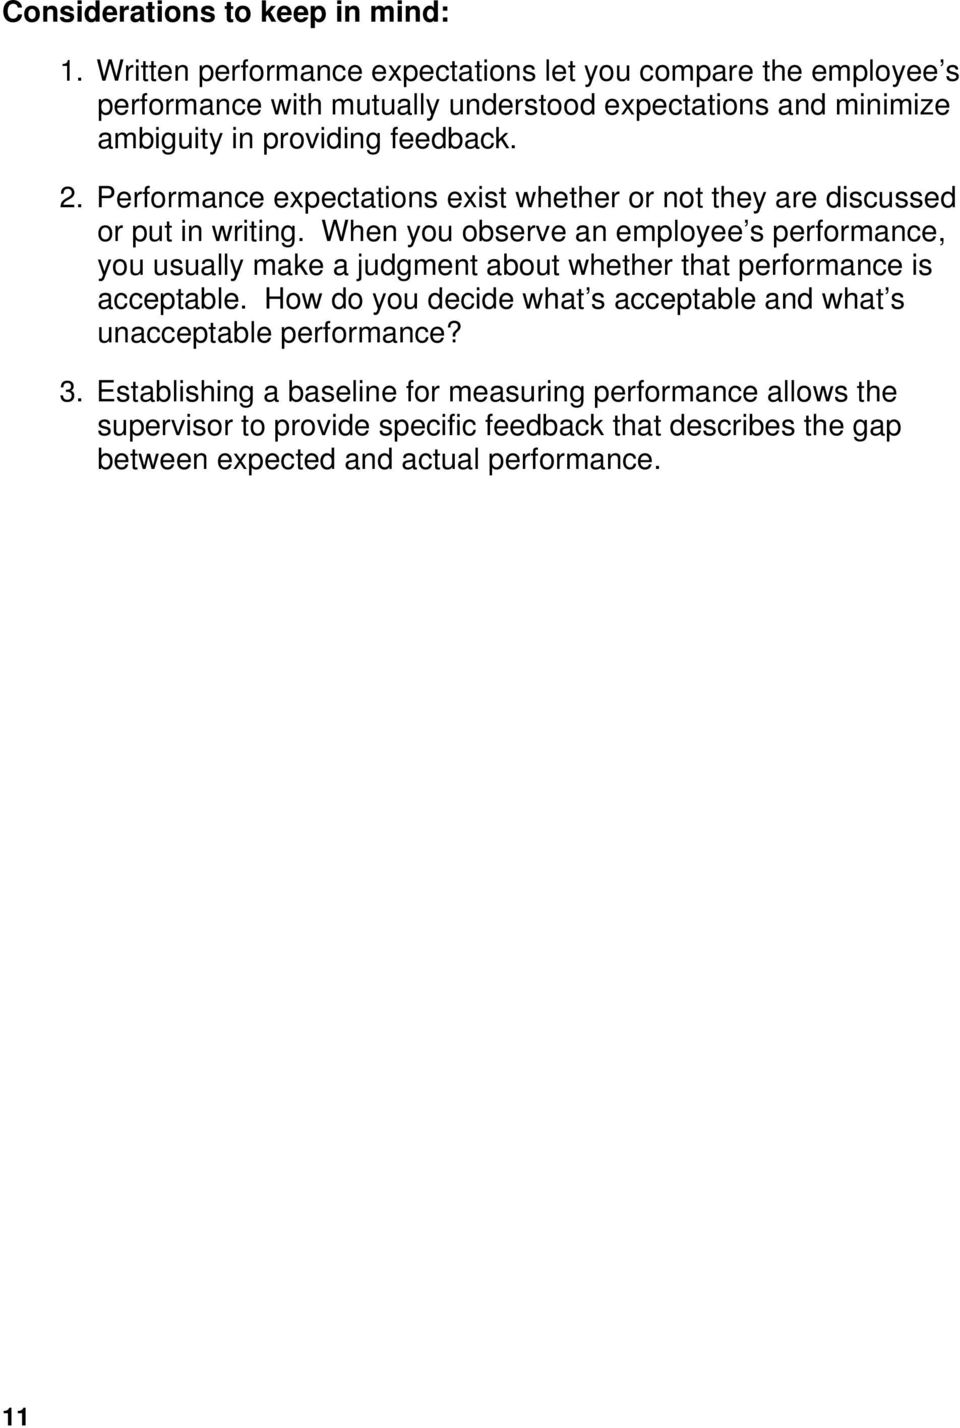 2. Performance expectations exist whether or not they are discussed or put in writing.